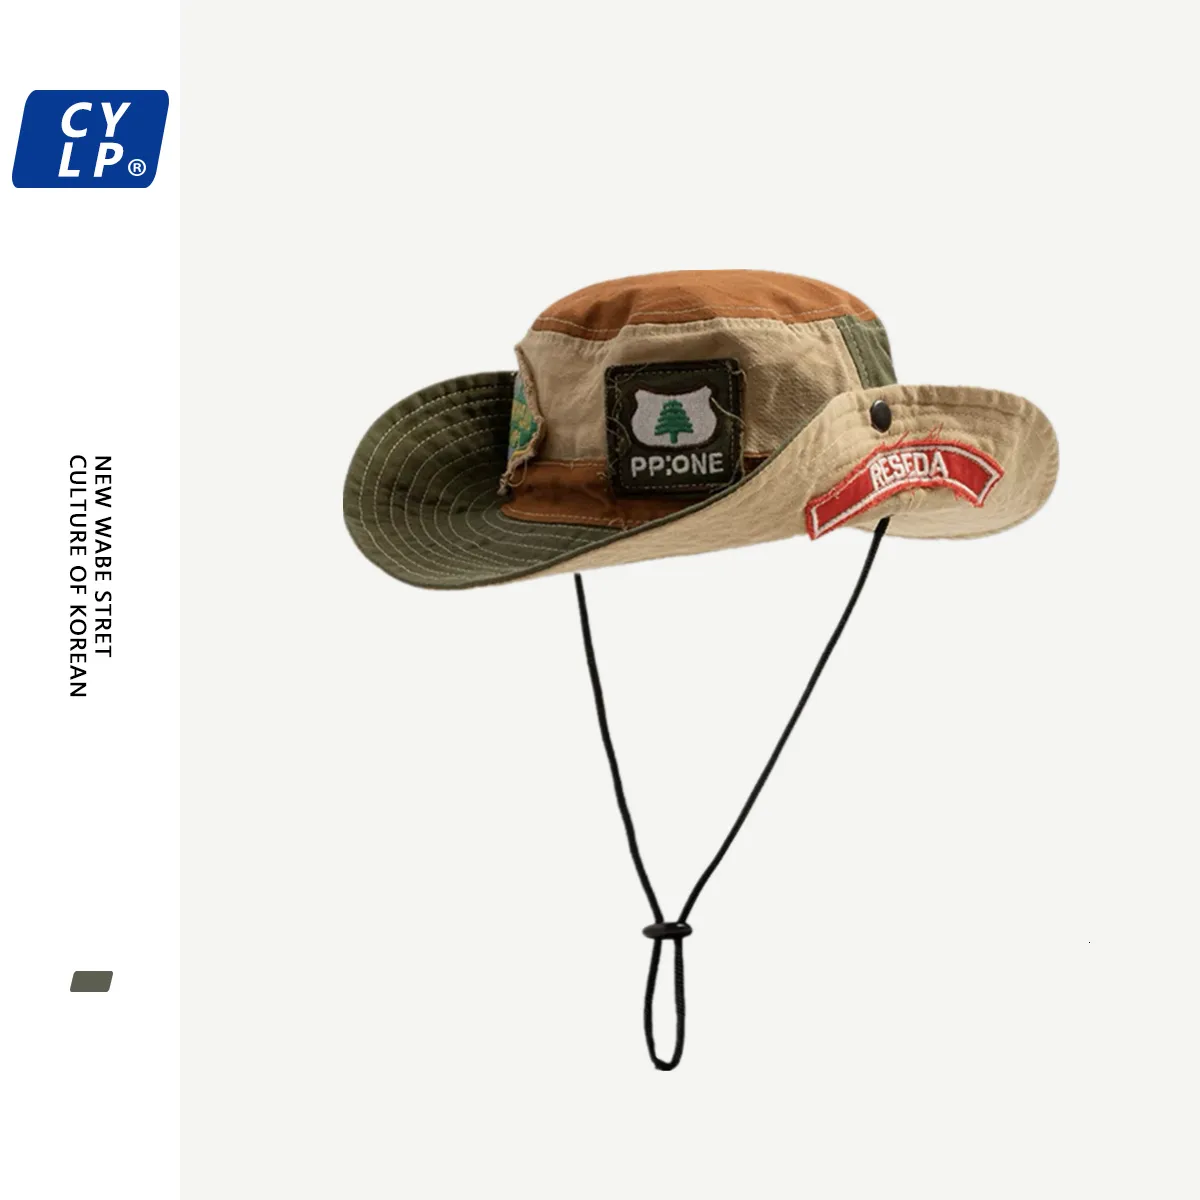 Vintage Patch Madewell Bucket Hat For Men And Women Wide Brim Sun Hat Ideal  For Outdoor Travel, Camping, And Fishing Alpine Style Sun Cap Style #230824  From Qiyue07, $12.44